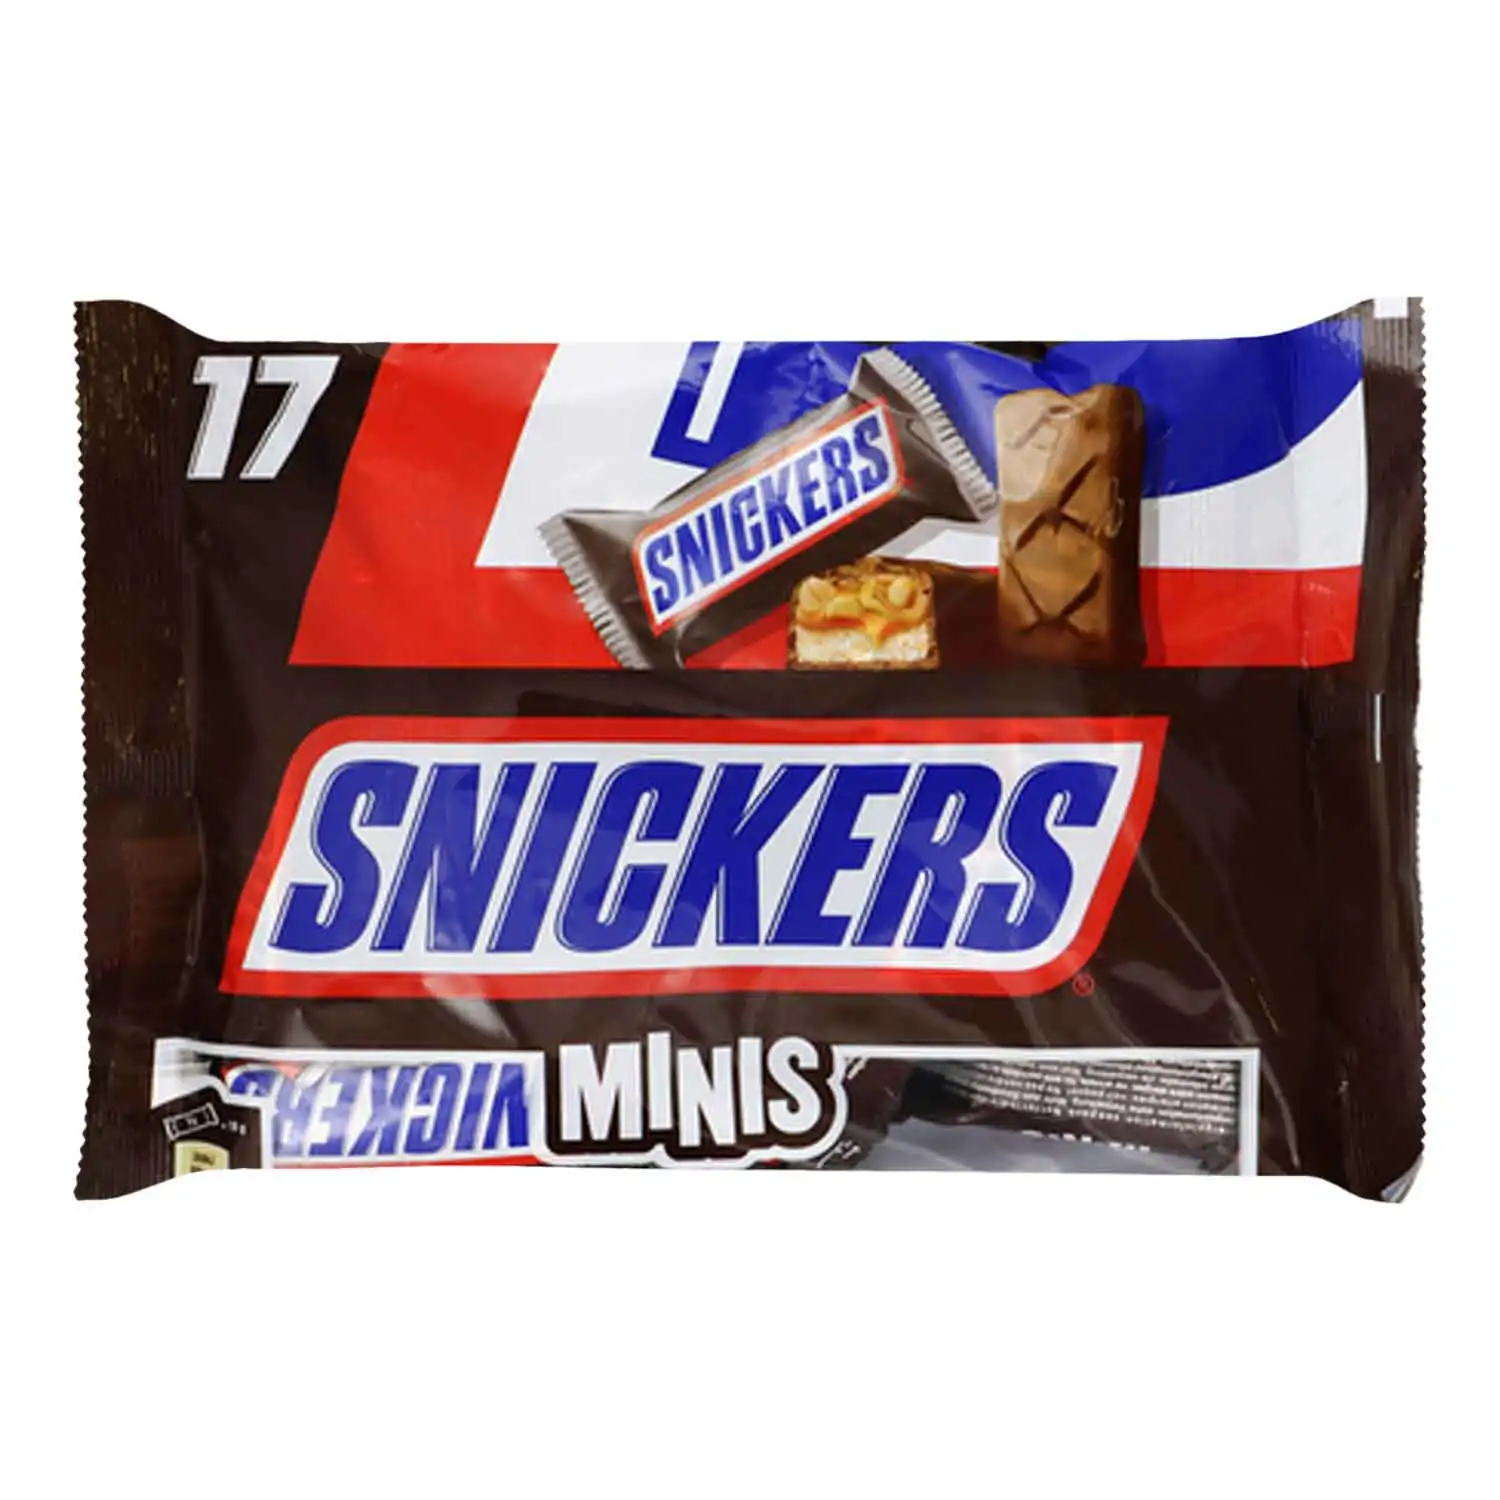 Snickers minis 333g - Buy at Real Tobacco